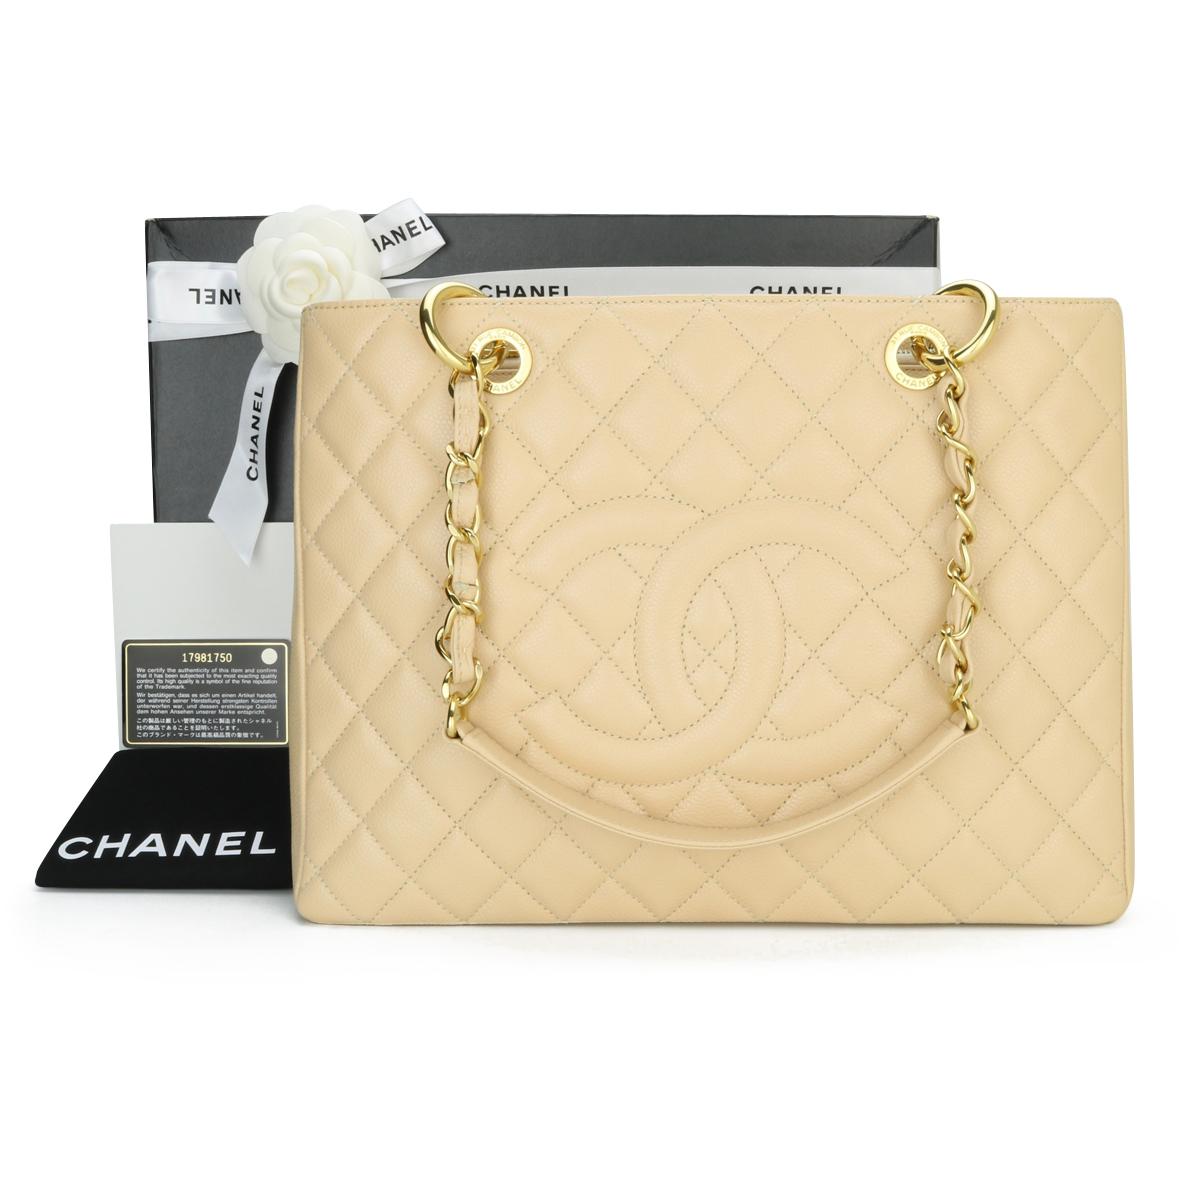 CHANEL Grand Shopping Tote (GST) Beige Caviar with Gold Hardware 2013.

This bag is in excellent condition, the bag still holds its original shape, and the hardware is still very shiny.

As Chanel has discontinued the Grand Shopping Tote (GST), it